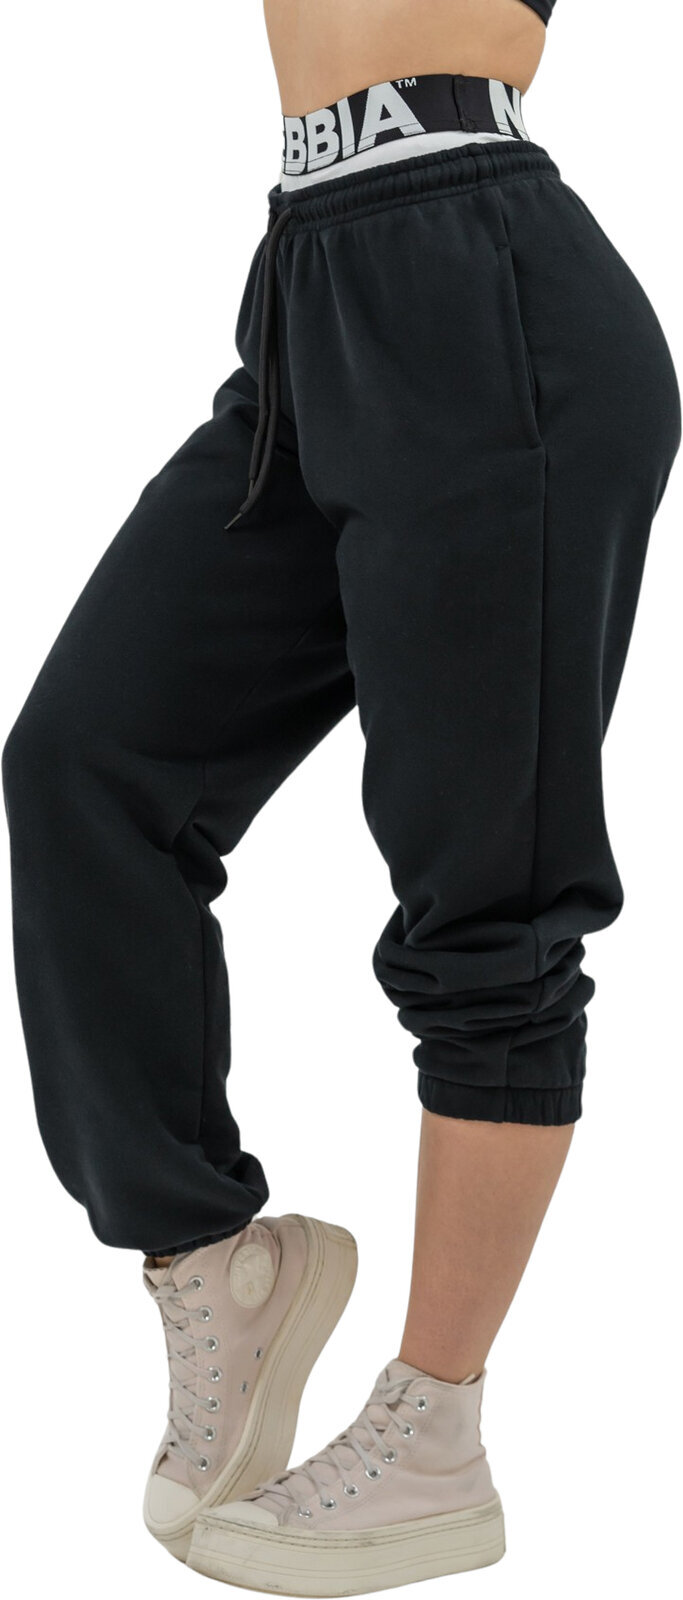 Fitness Trousers Nebbia Fitness Sweatpants Muscle Mommy Black S Fitness Trousers